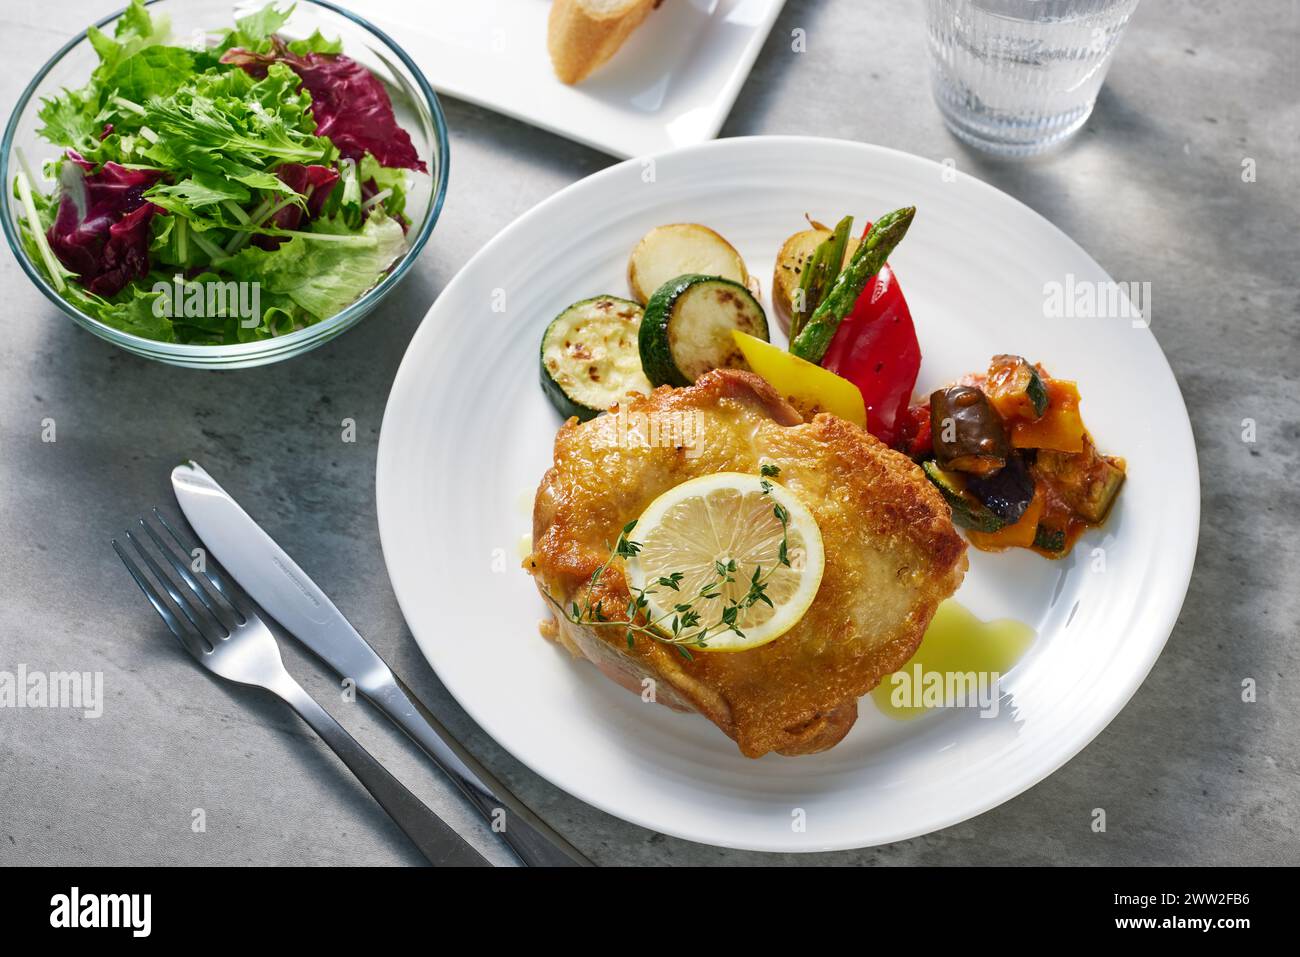 A plate with a chicken breast and vegetables Stock Photo